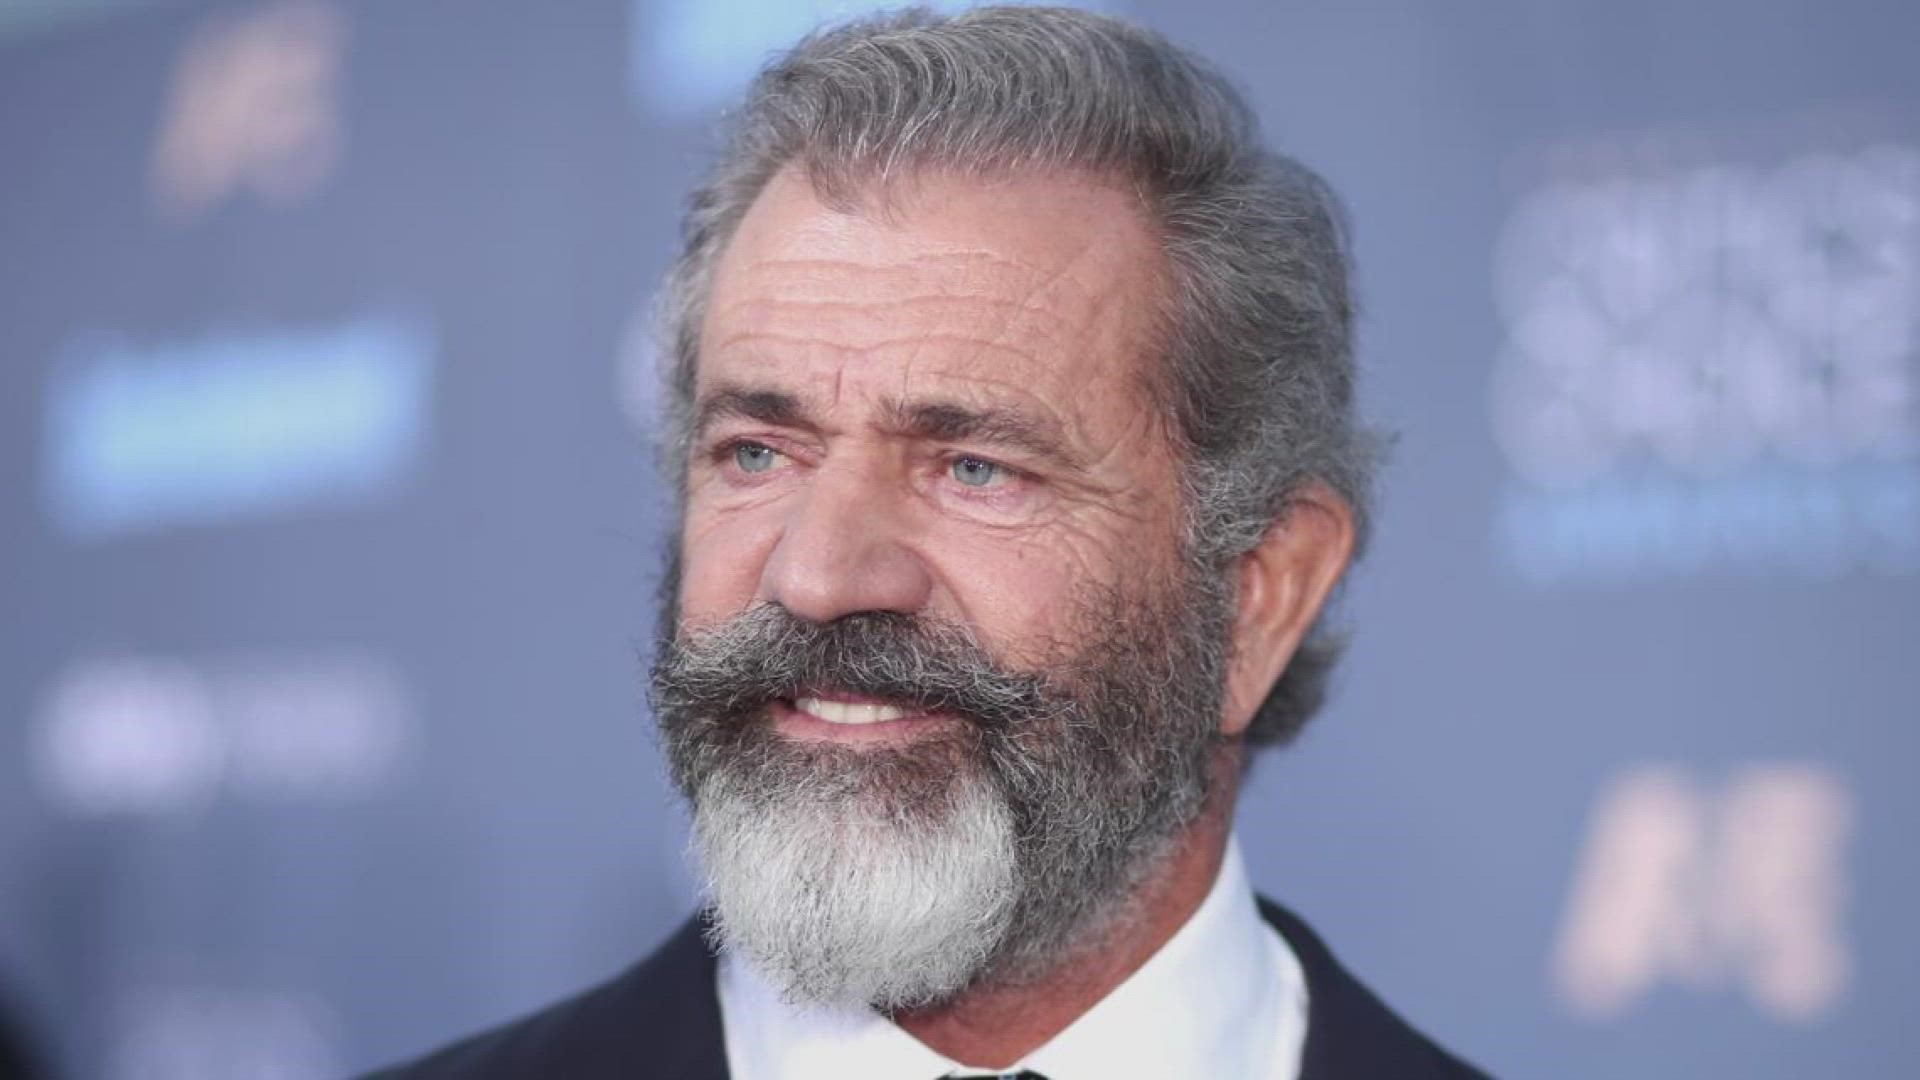 The Krewe of Endymion pulled actor Mel Gibson as its Grand Marshal of the 2023 parade less than 24 hours after it has announced he would ride.